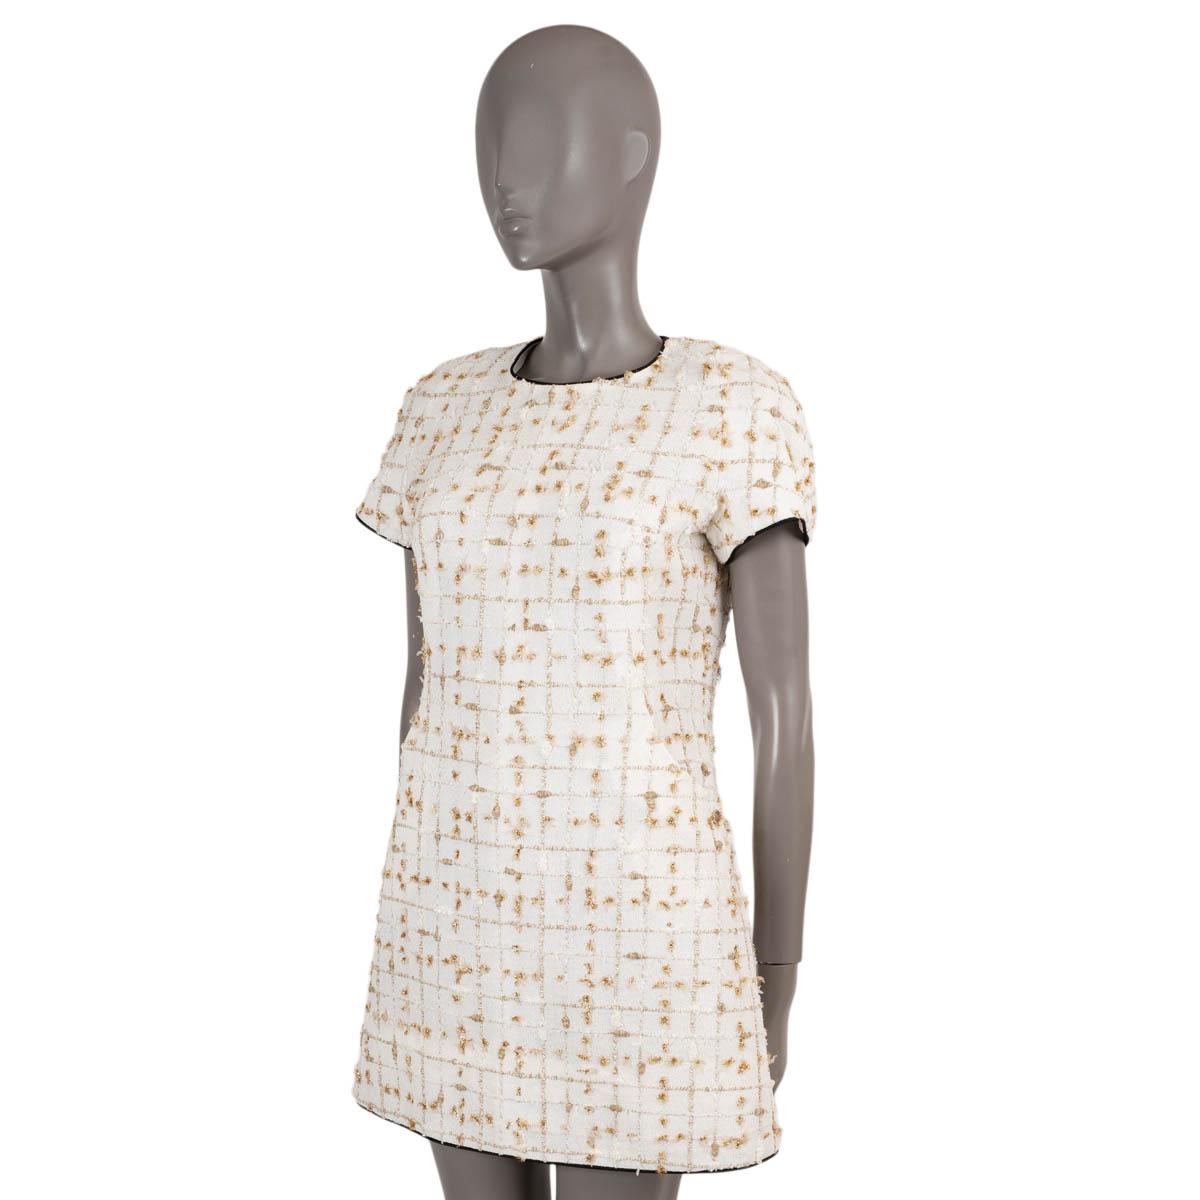 100% authentic Chanel lurex tweed dress in white, beige and gold polyamide (71%), viscose (9%), polyester (8%), cotton (6%) and acrylic (6%). Features a crewneck, slit pocket and short sleeve. Closes with a concealed zipper in the back and is lined